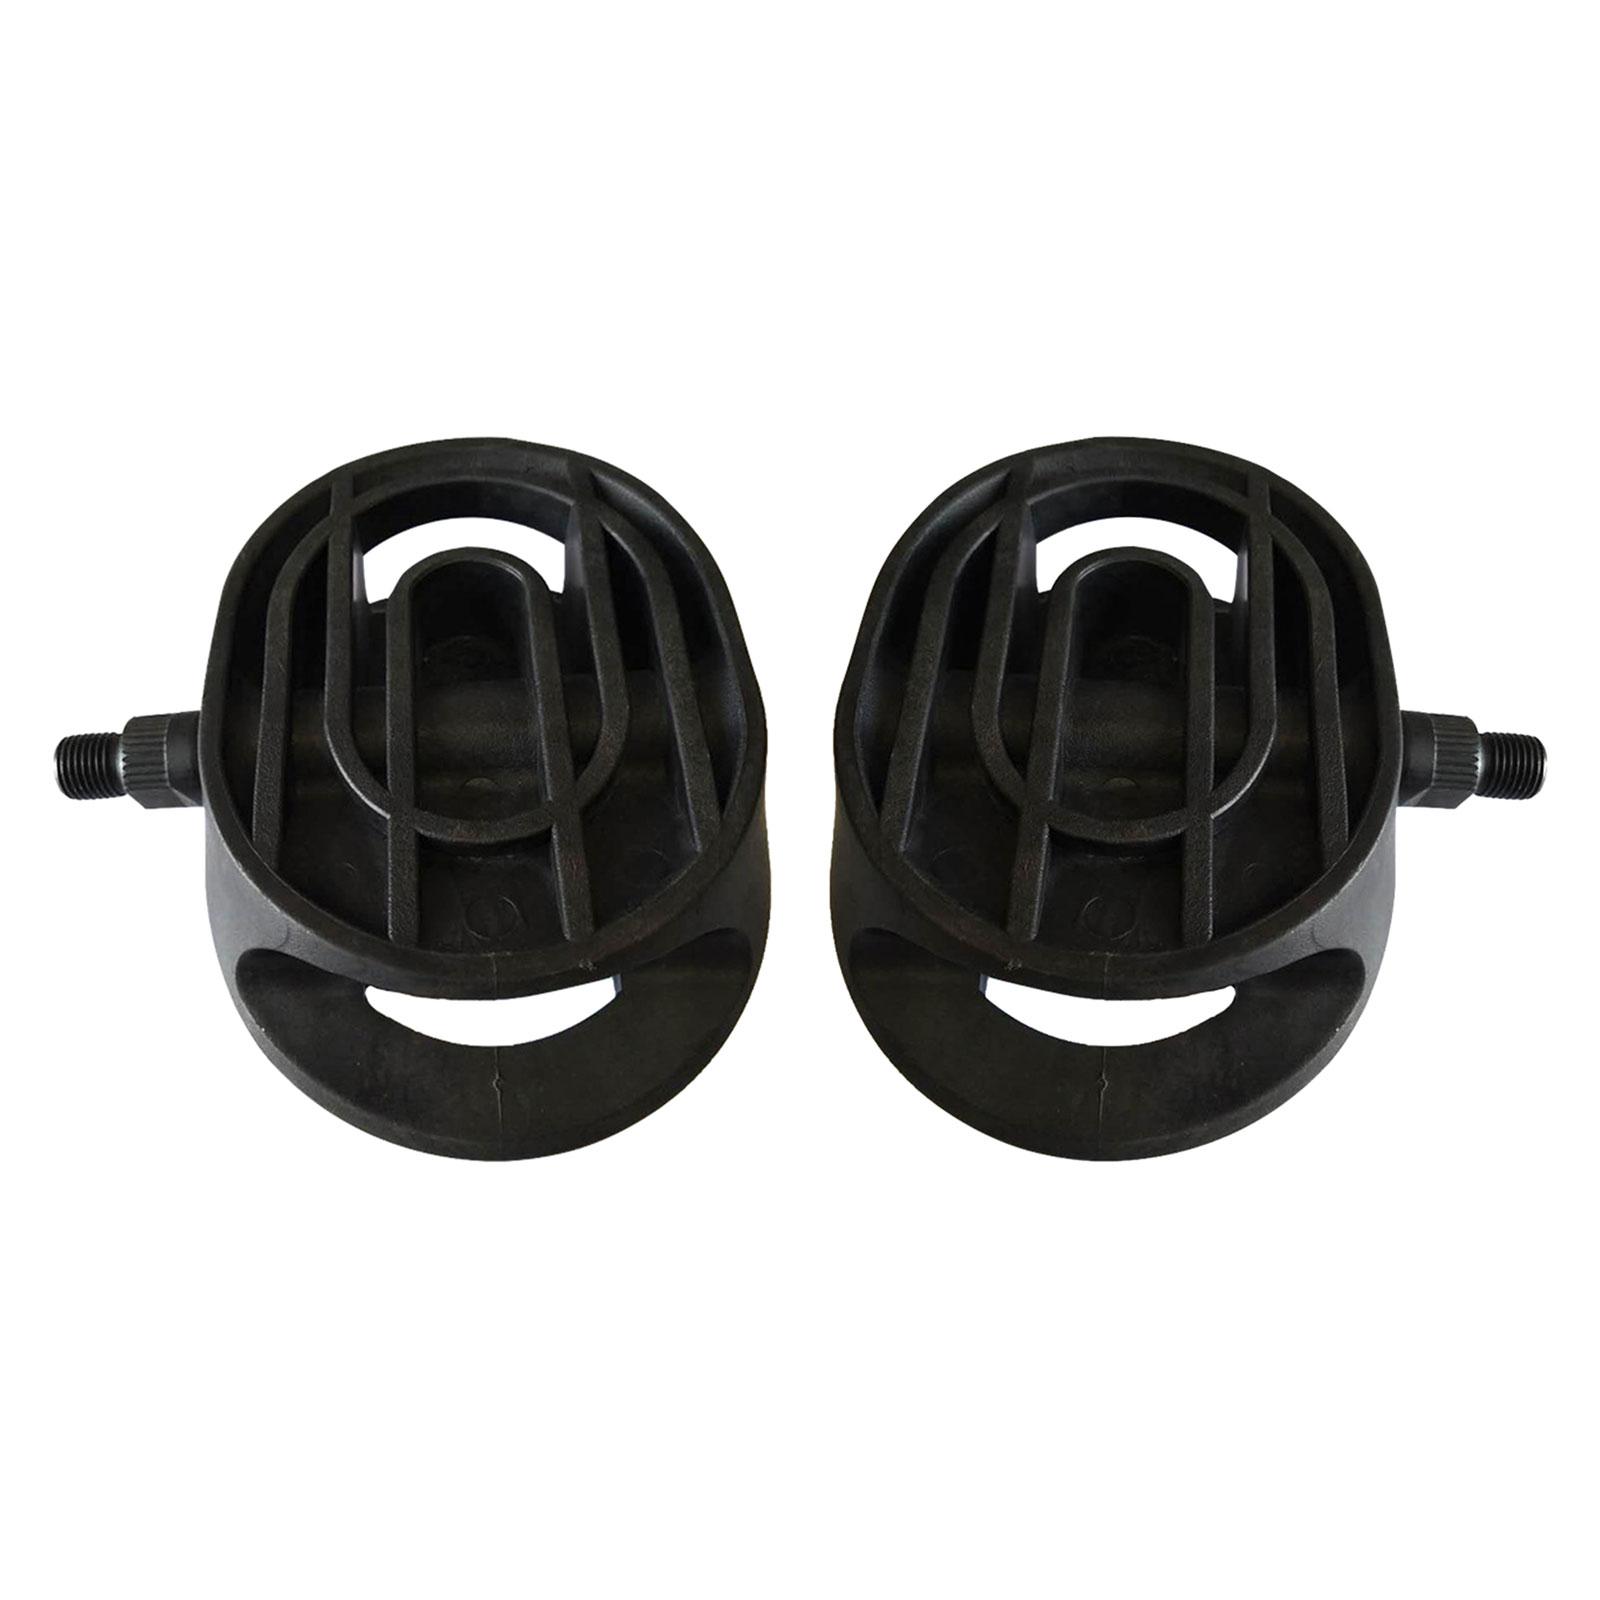 2Pcs Exercise Bike Pedals, Footboard Fitness Equipment Pedals Exercise Machine Foot Pedals